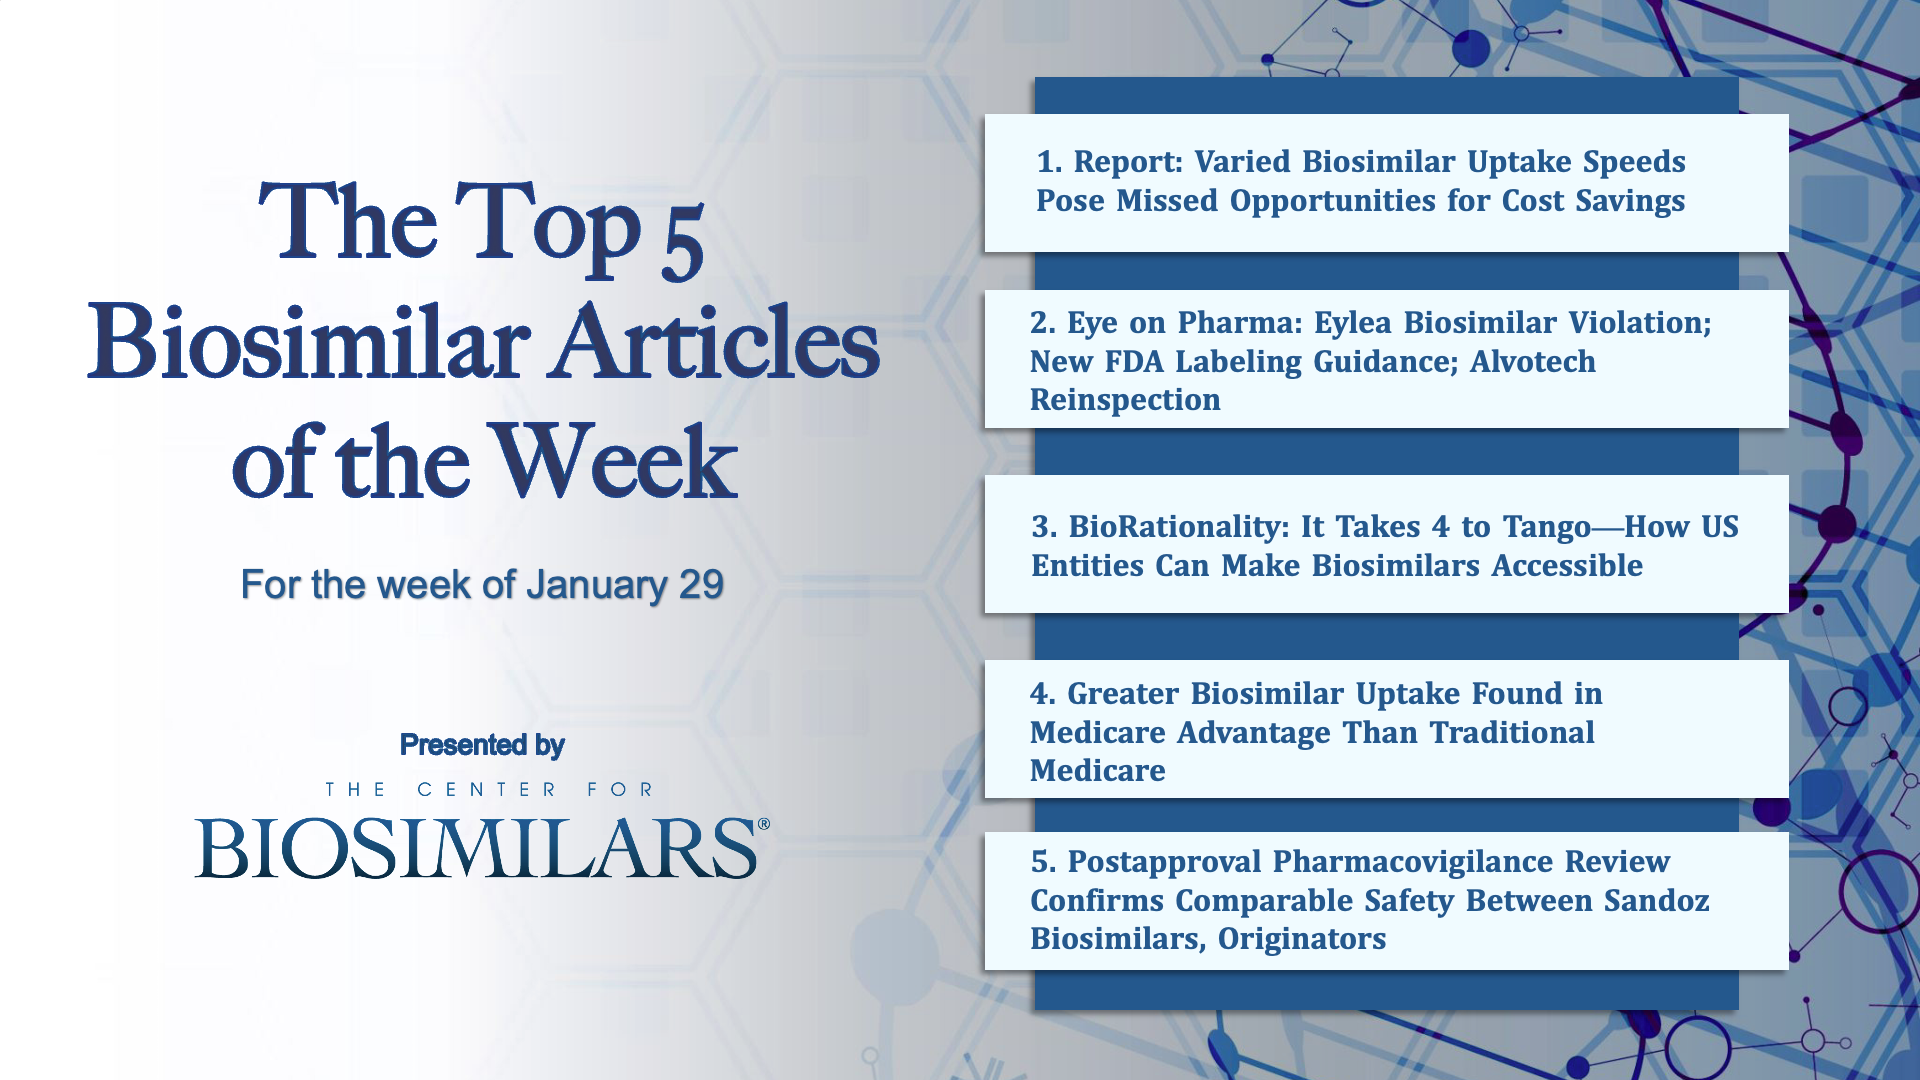 The Top 5 Biosimilar Articles for the Week of January 29